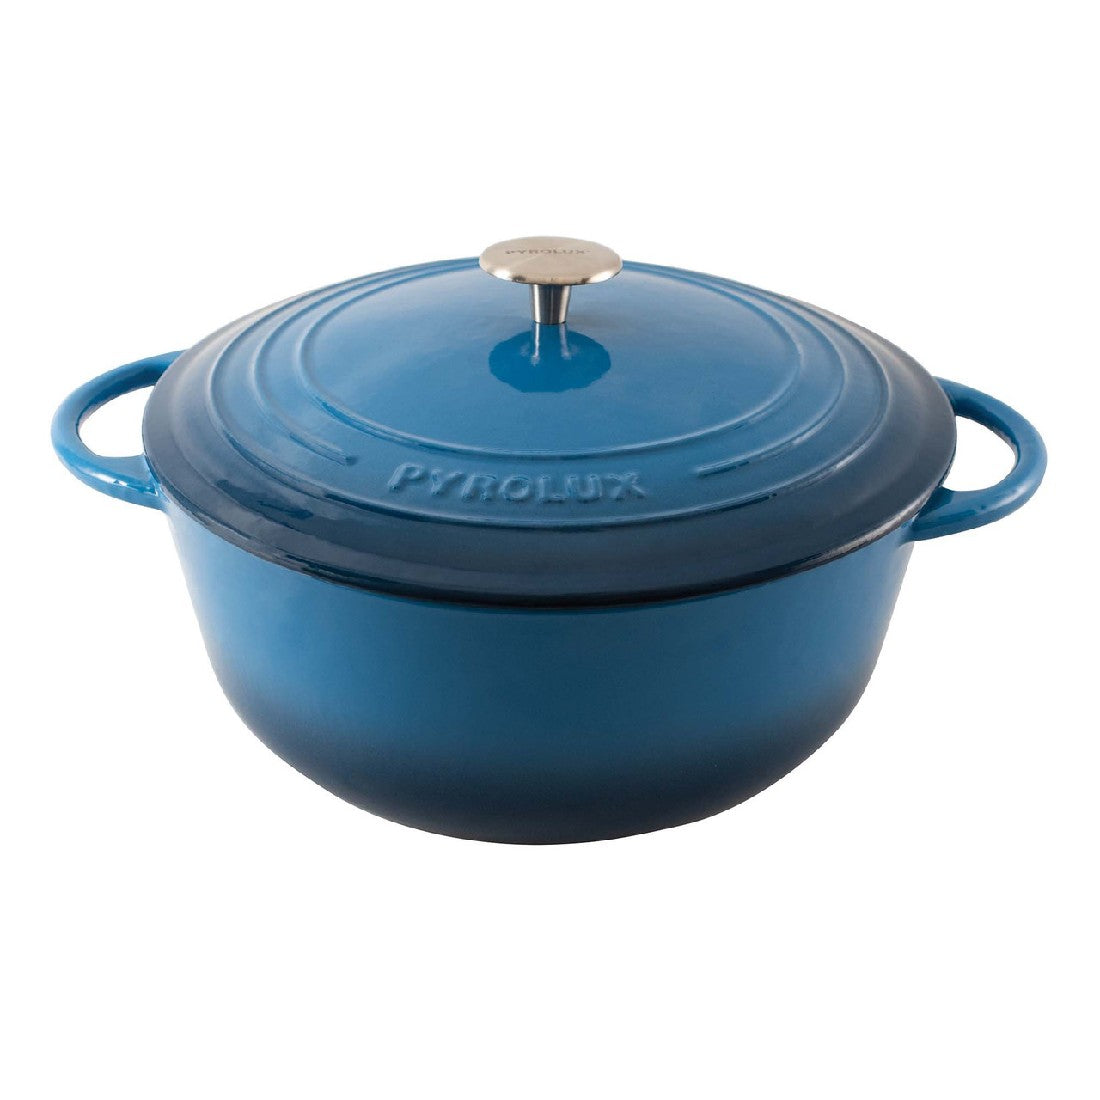 Pyrolux Pyrochef 20cm/2l Round French Oven Ocean Blue